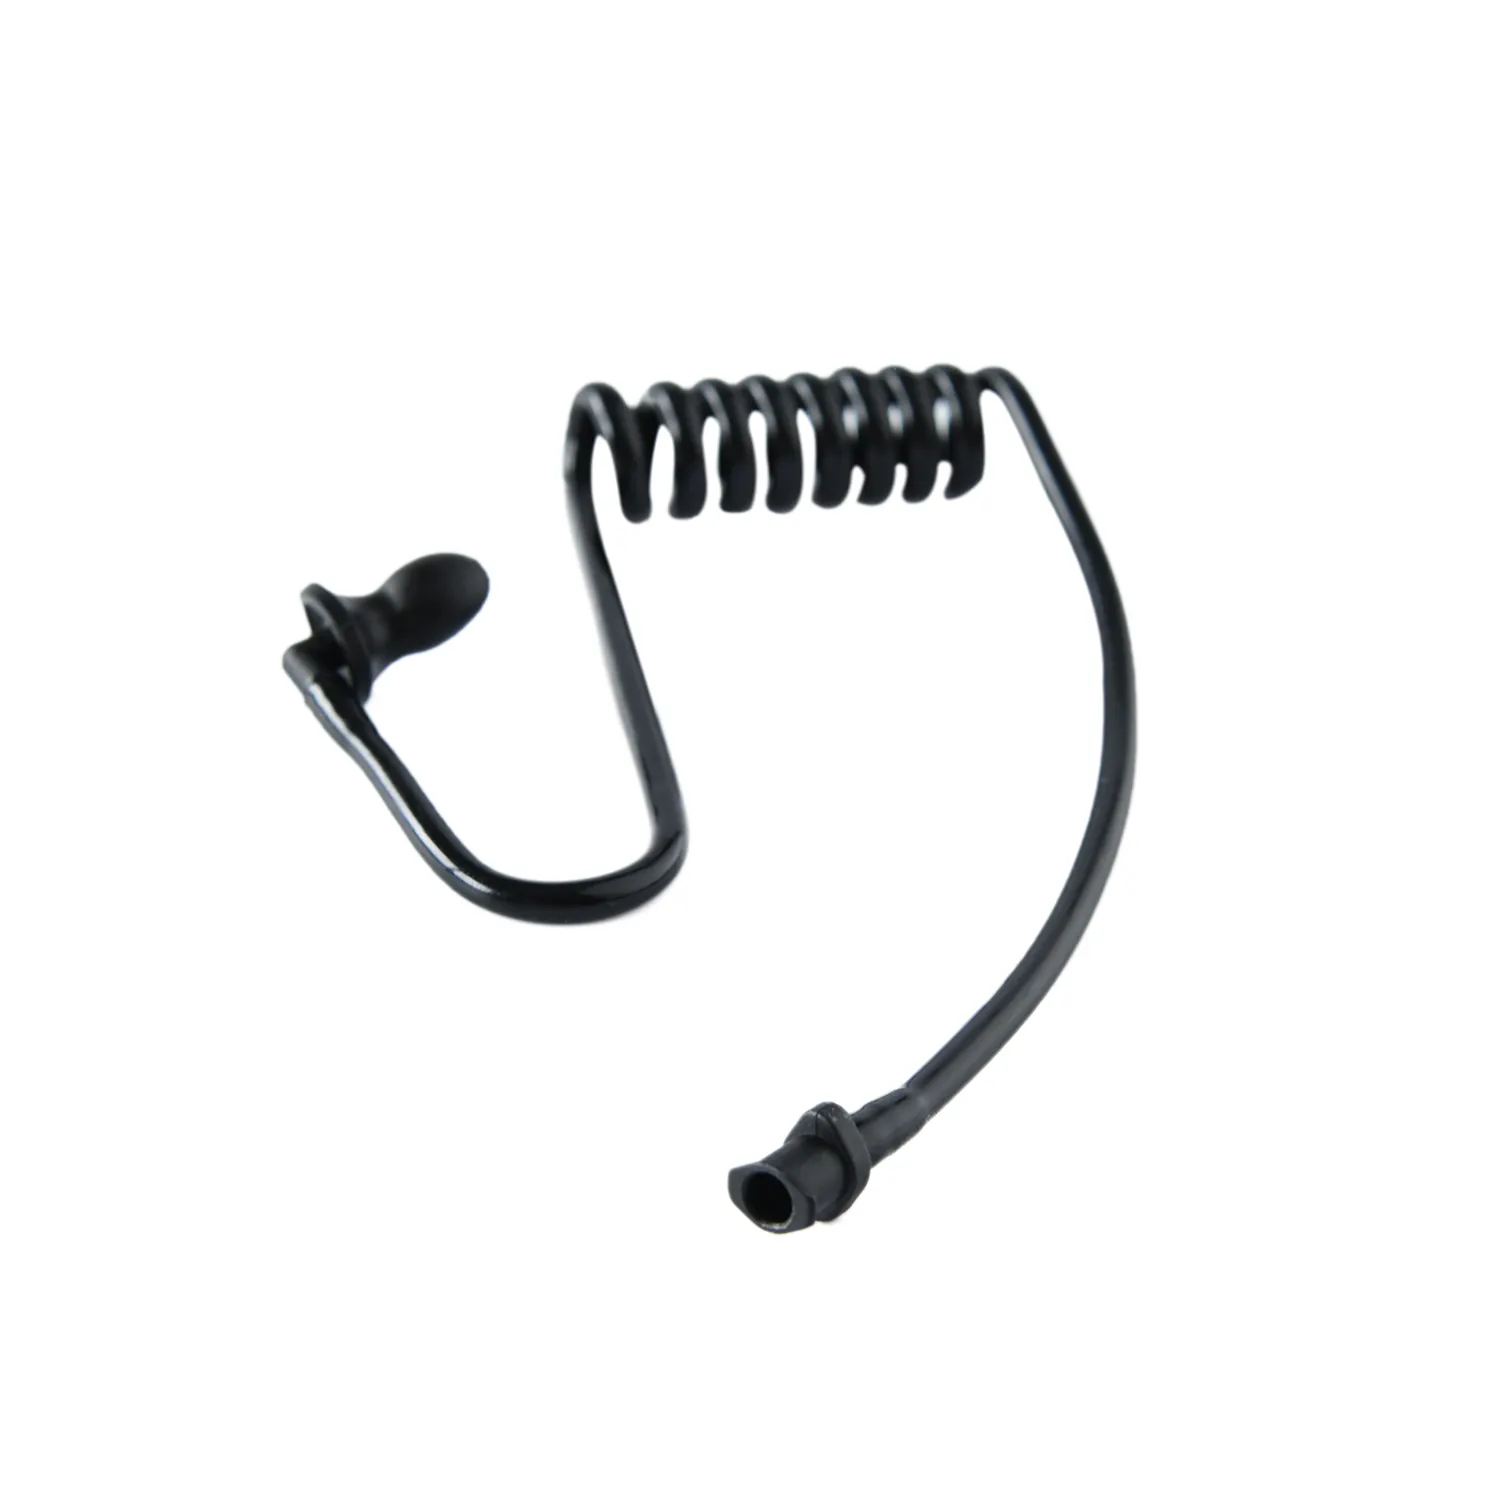 DLECNFUN Replacement Acoustic Coil Tube - Compatible for Motorola Kenwood Two Way Radio Walkie Talkie Earpiece Earbuds